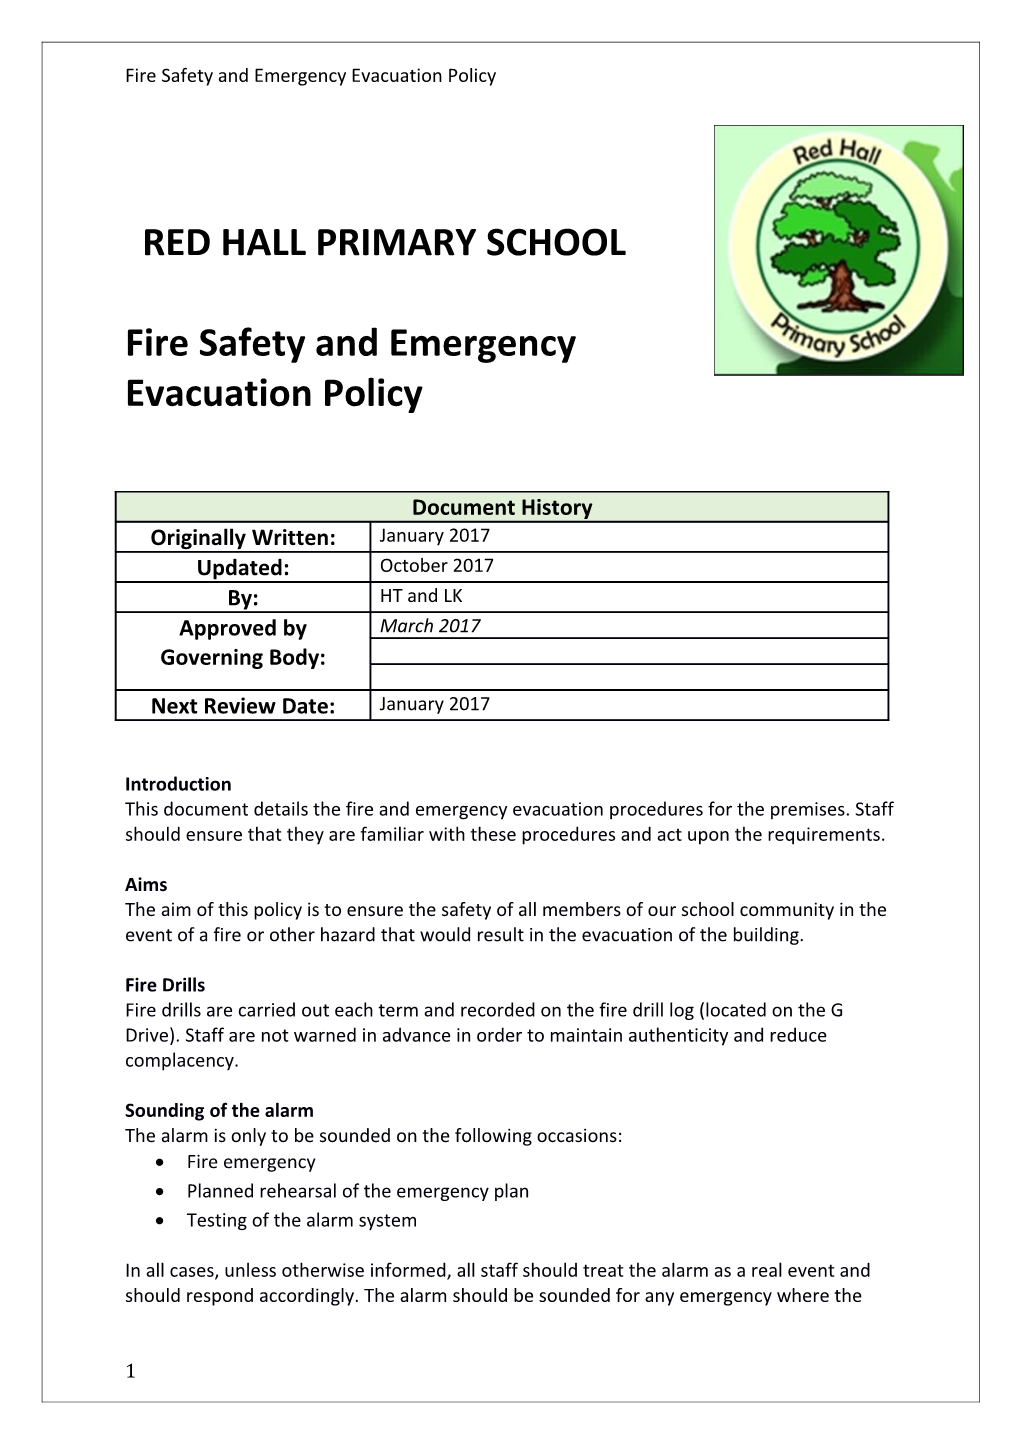 Fire Safety and Emergency Evacuation Policy